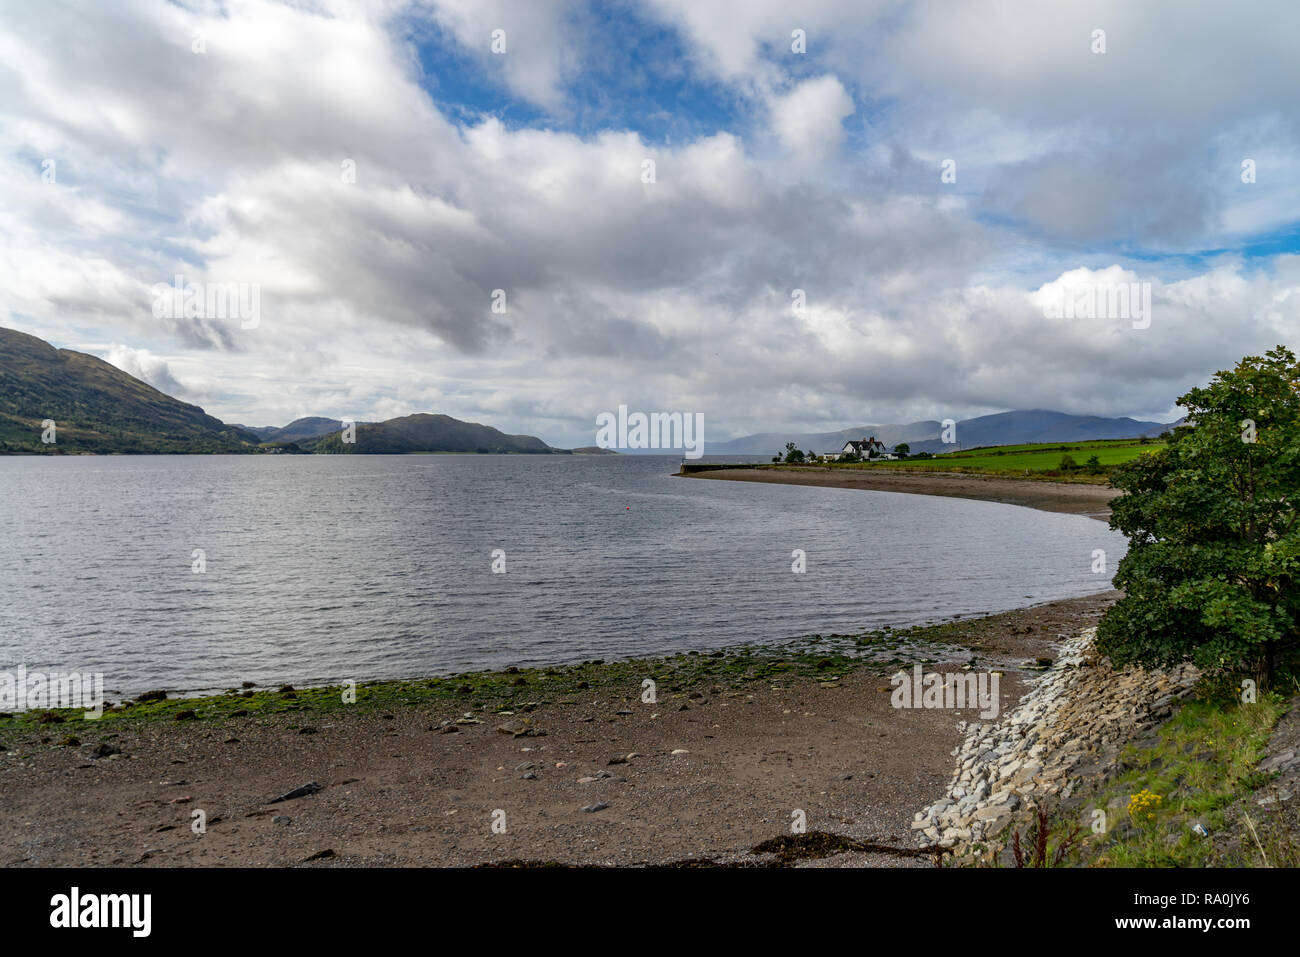 Storm clouds over the Loch Linnhe and Mountains near Onich, Scotland Stock Photo